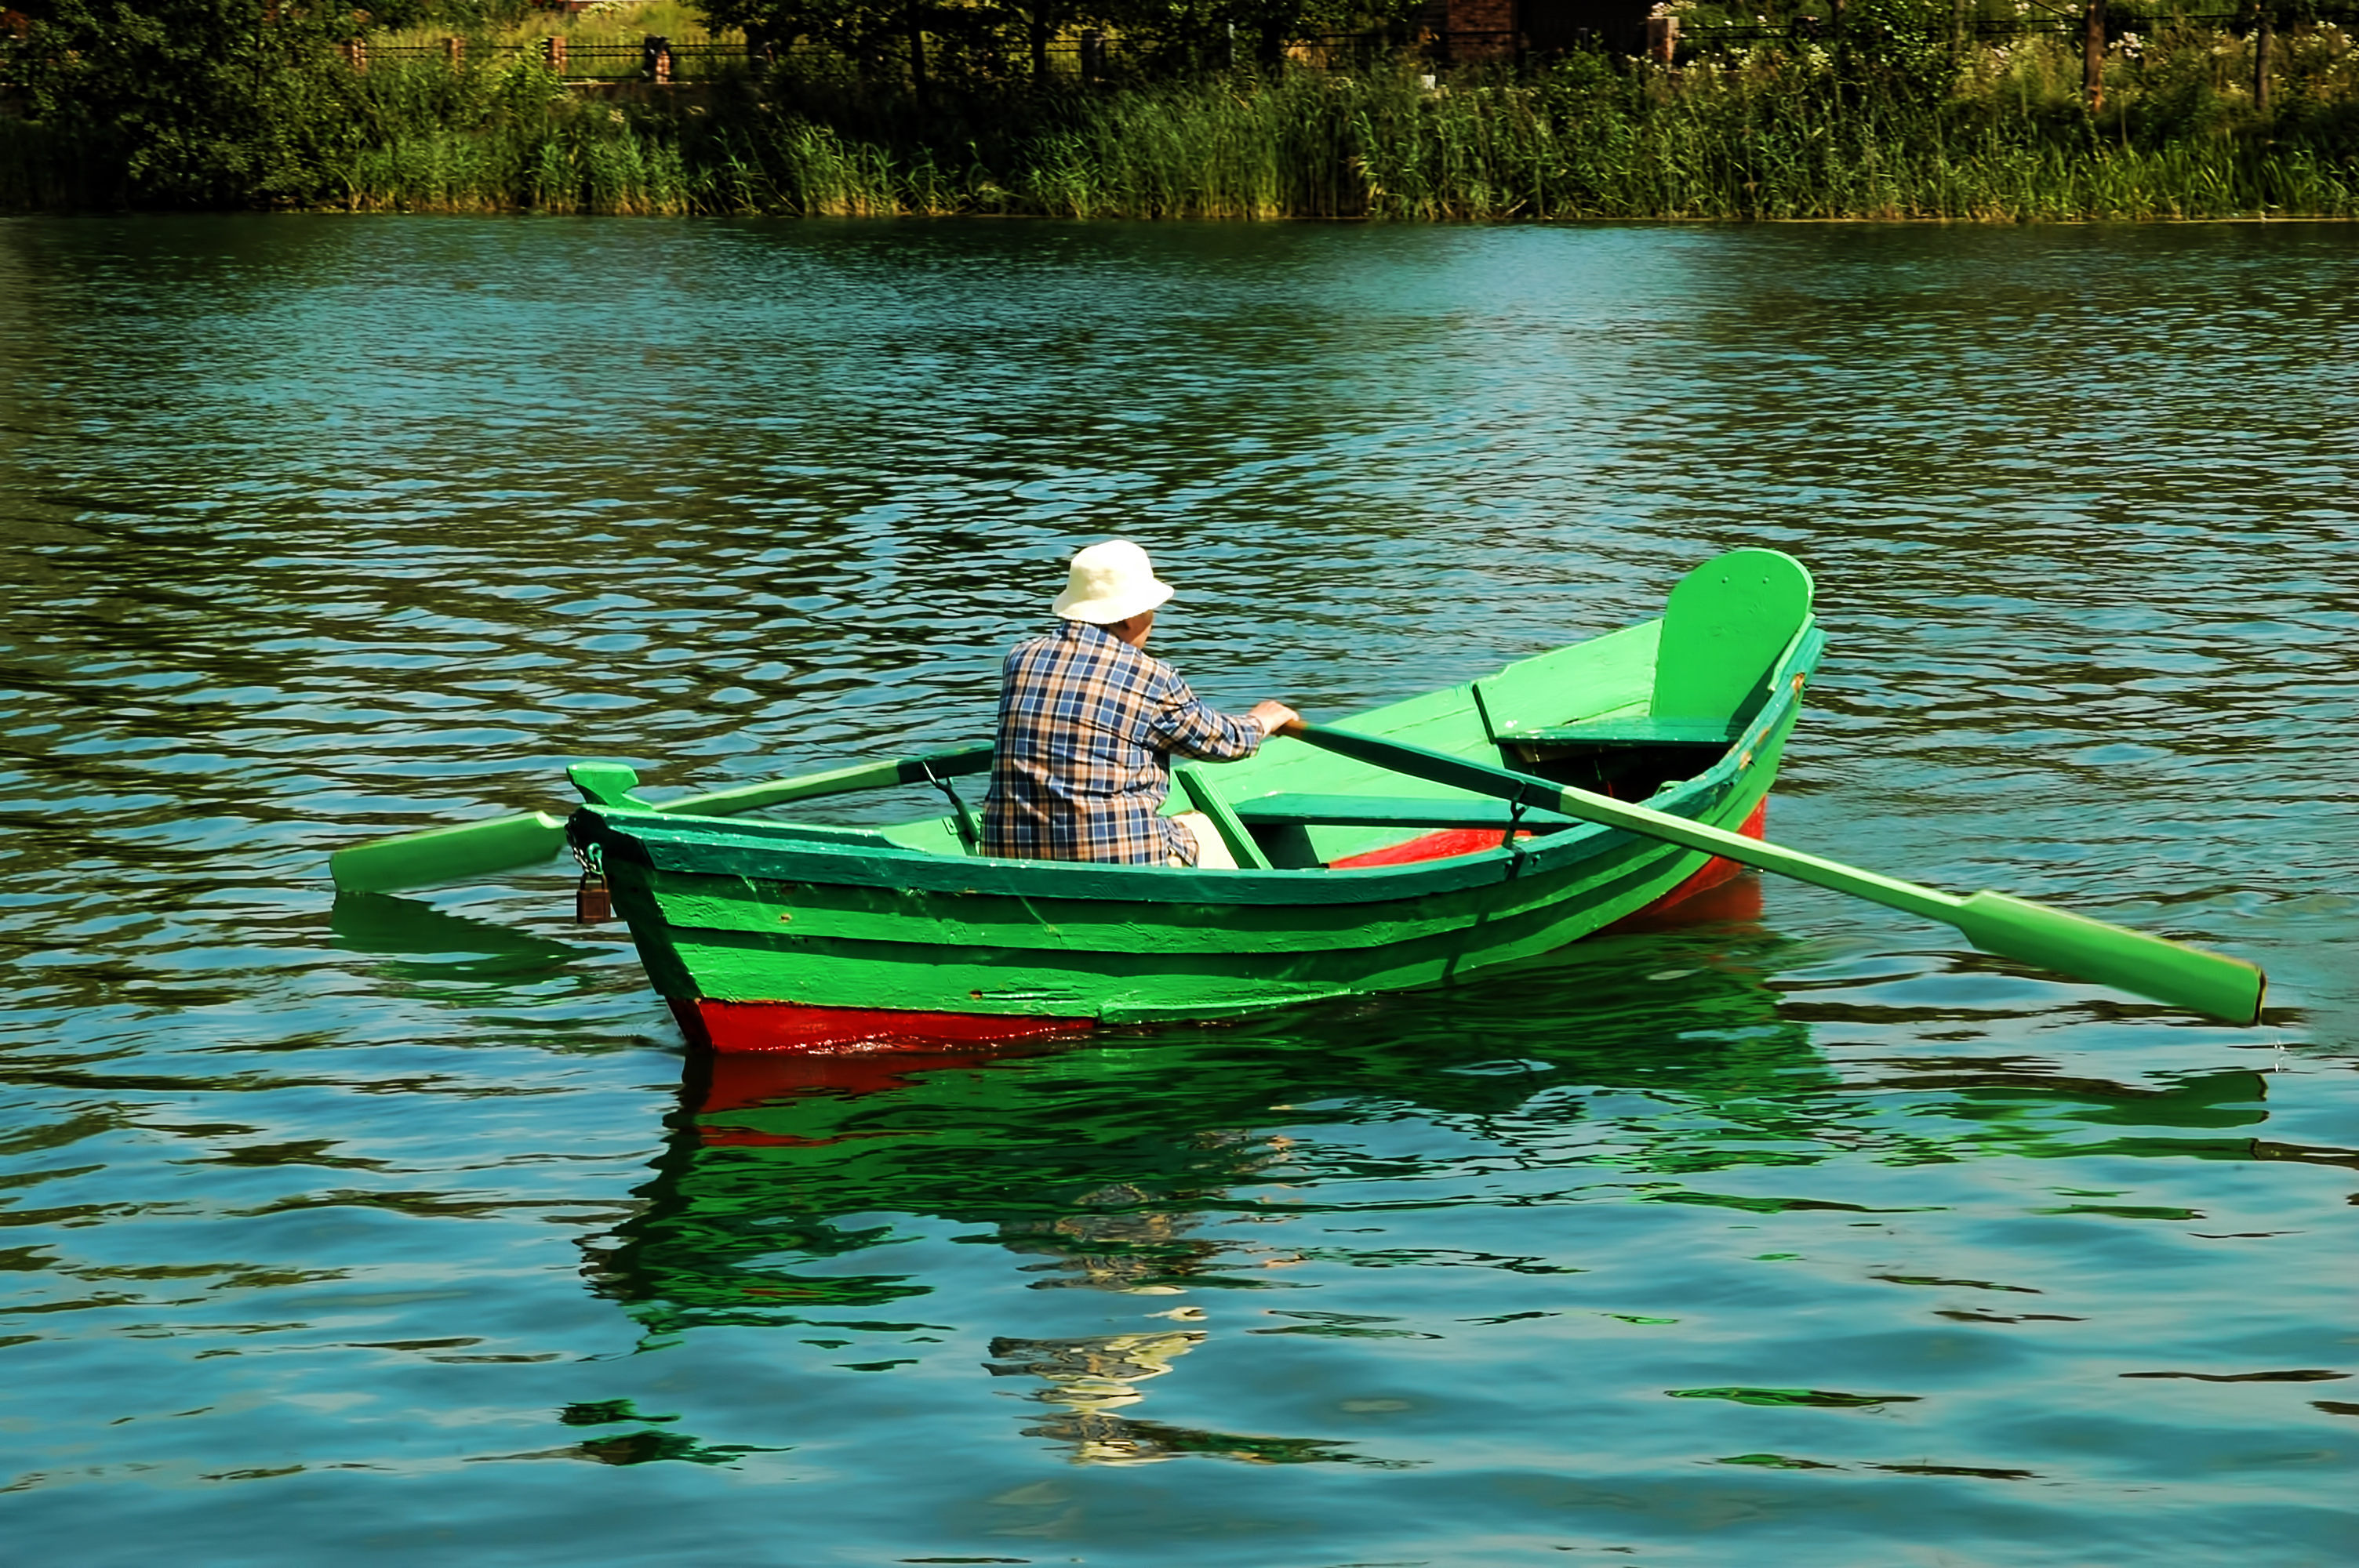 Old man in the boat photo